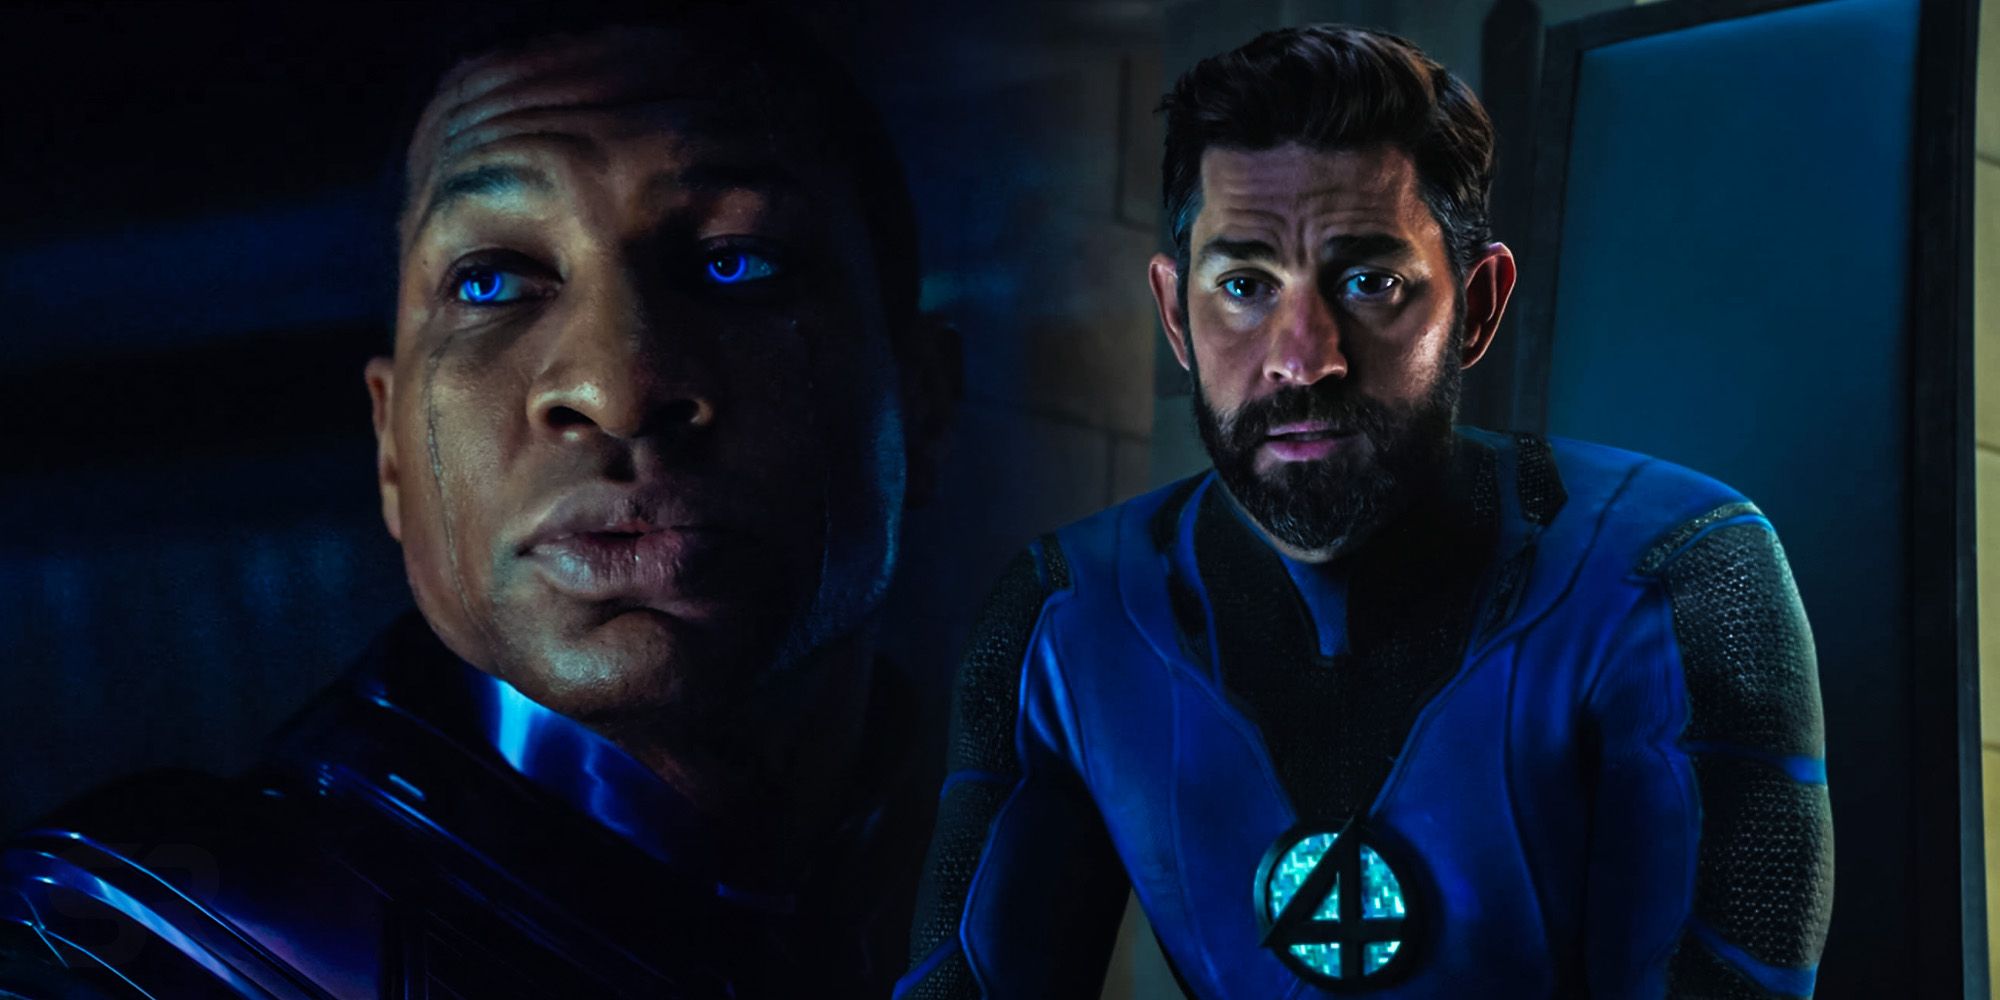 Split Image: Jonathan Majors as Kang the Conqueror in Quantumania;  John Krasinski as Reed Richards in the Multiverse of Madness